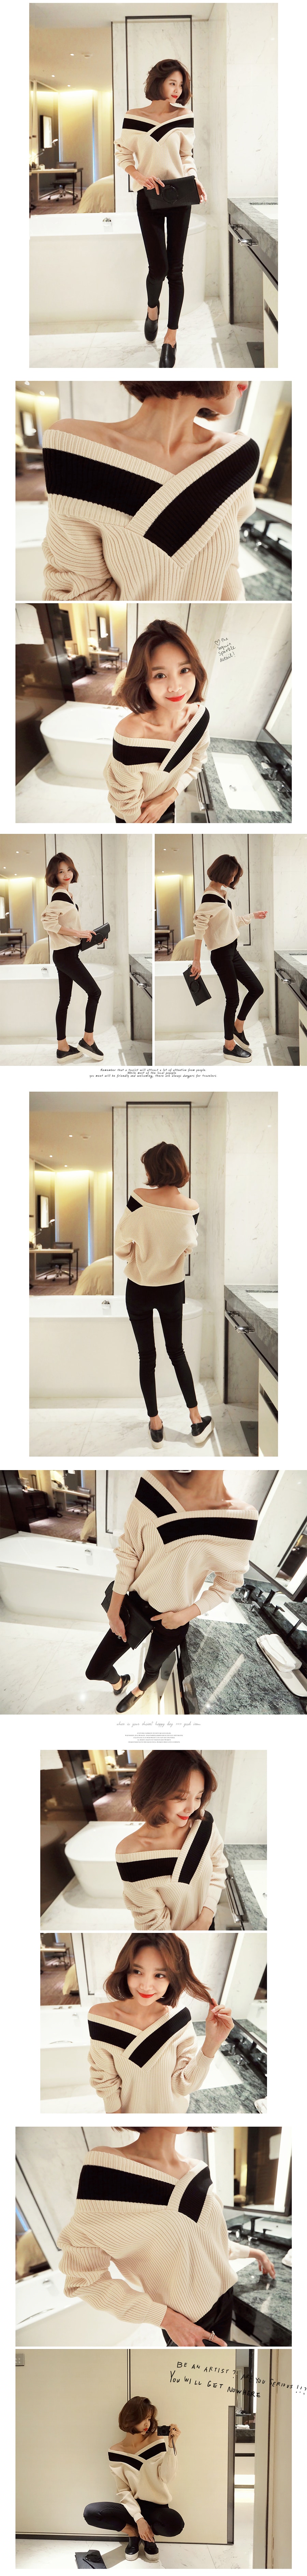 [KOREA] Contrast Panel Knit Sweater#Light Beige One Size(S-M) [Free Shipping]